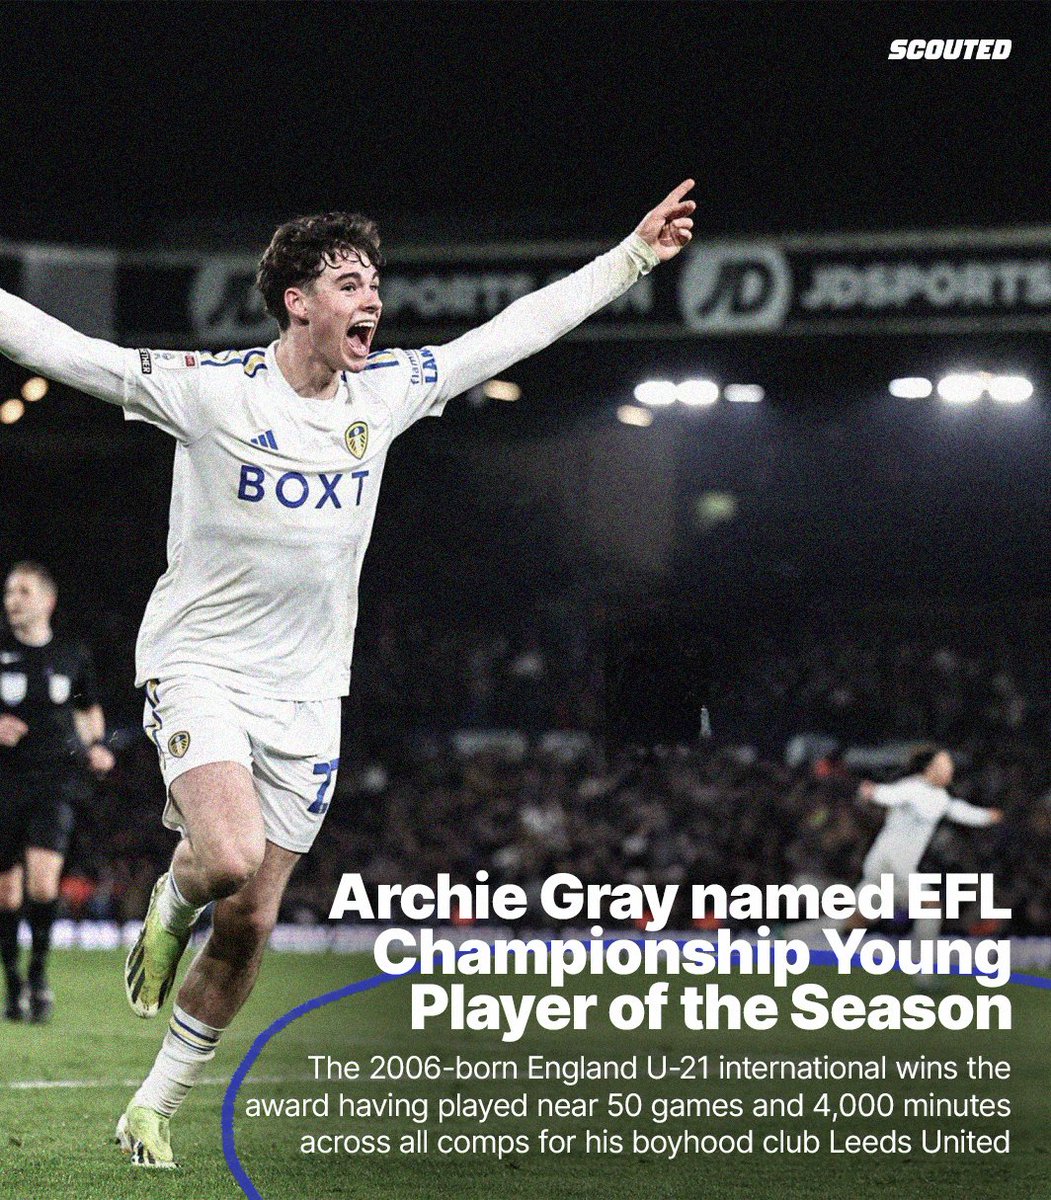 • Senior debut for boyhood club Leeds United • Almost 4,000 minutes across 50 appearances • Playing as a right-back, not a centre-midfielder In his first senior campaign, Archie Gray is the EFL Championship Young Player of the Season.